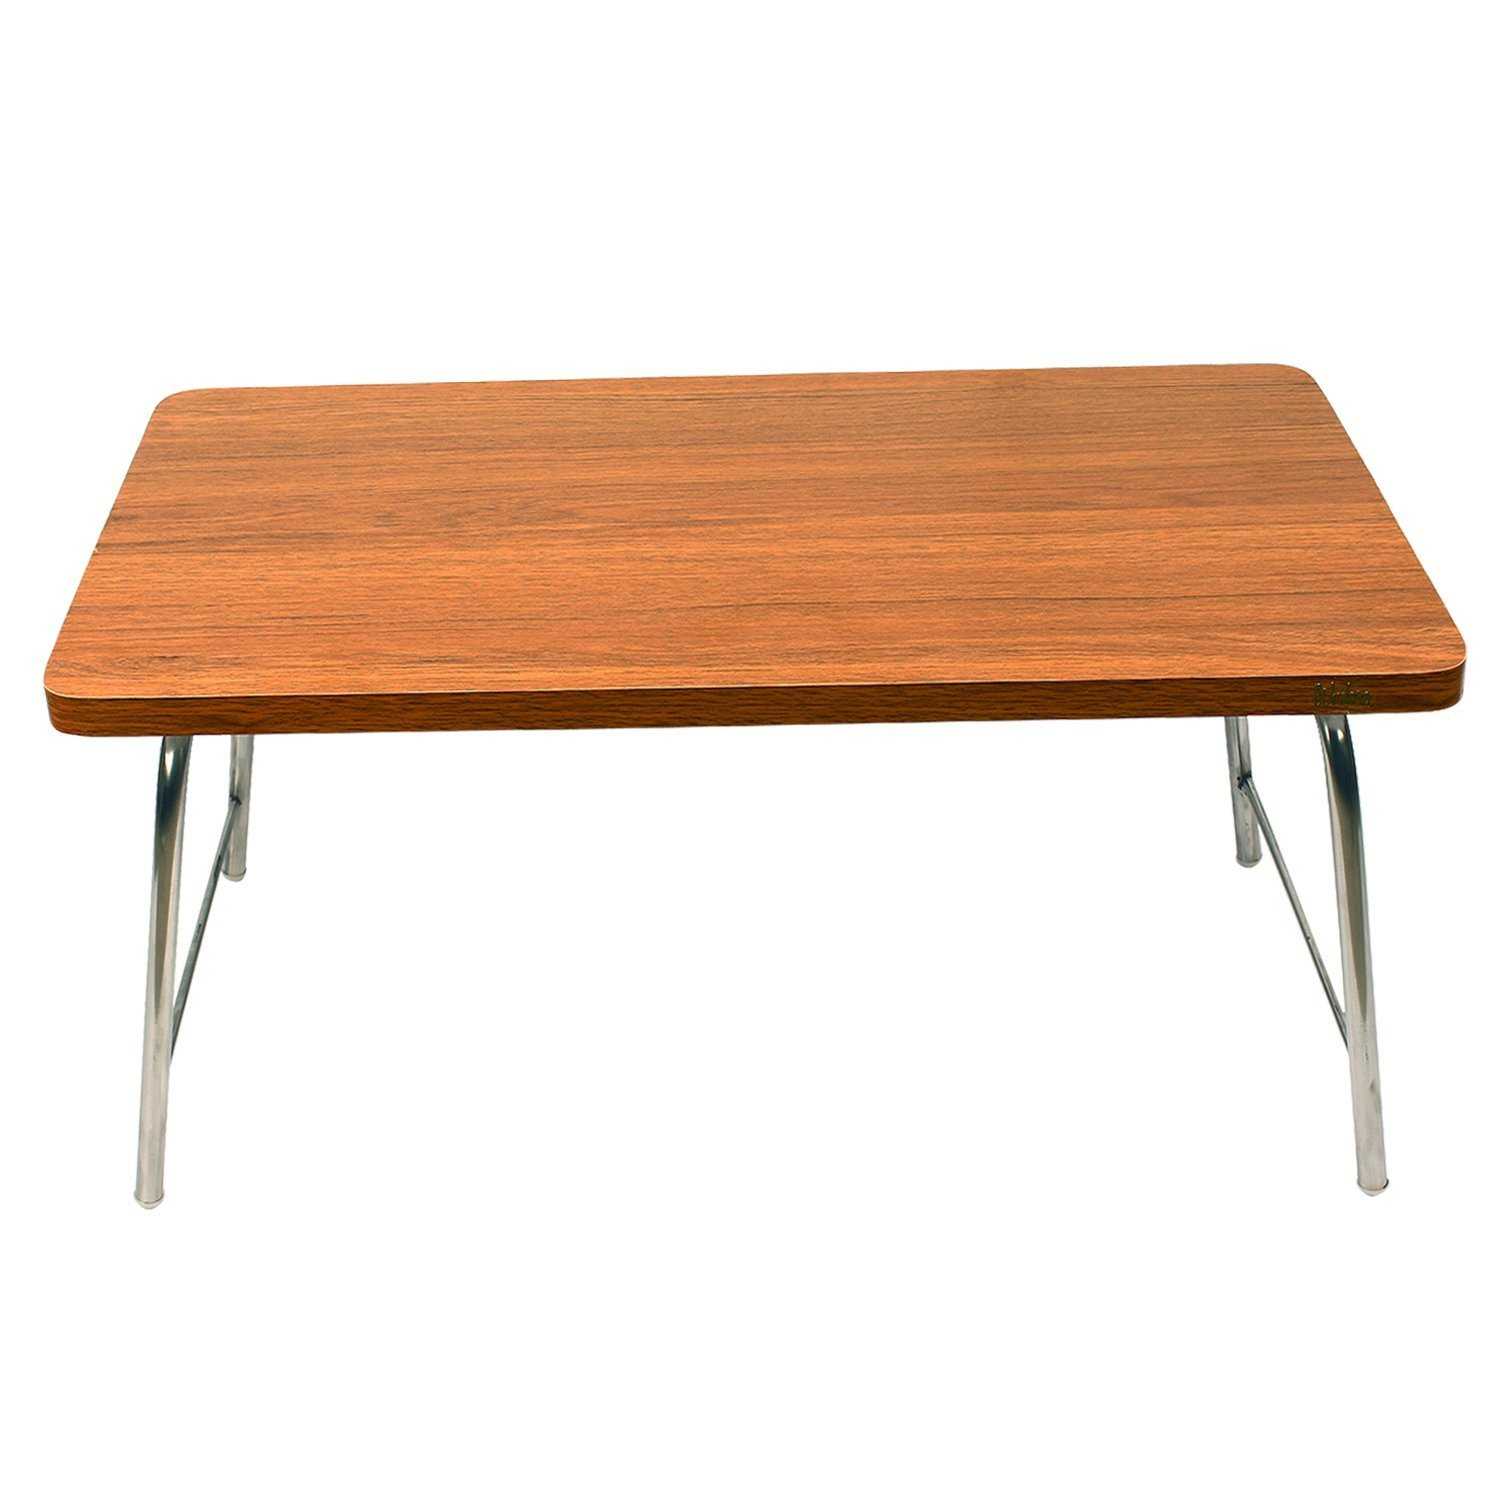 Walnut color bed laptop table